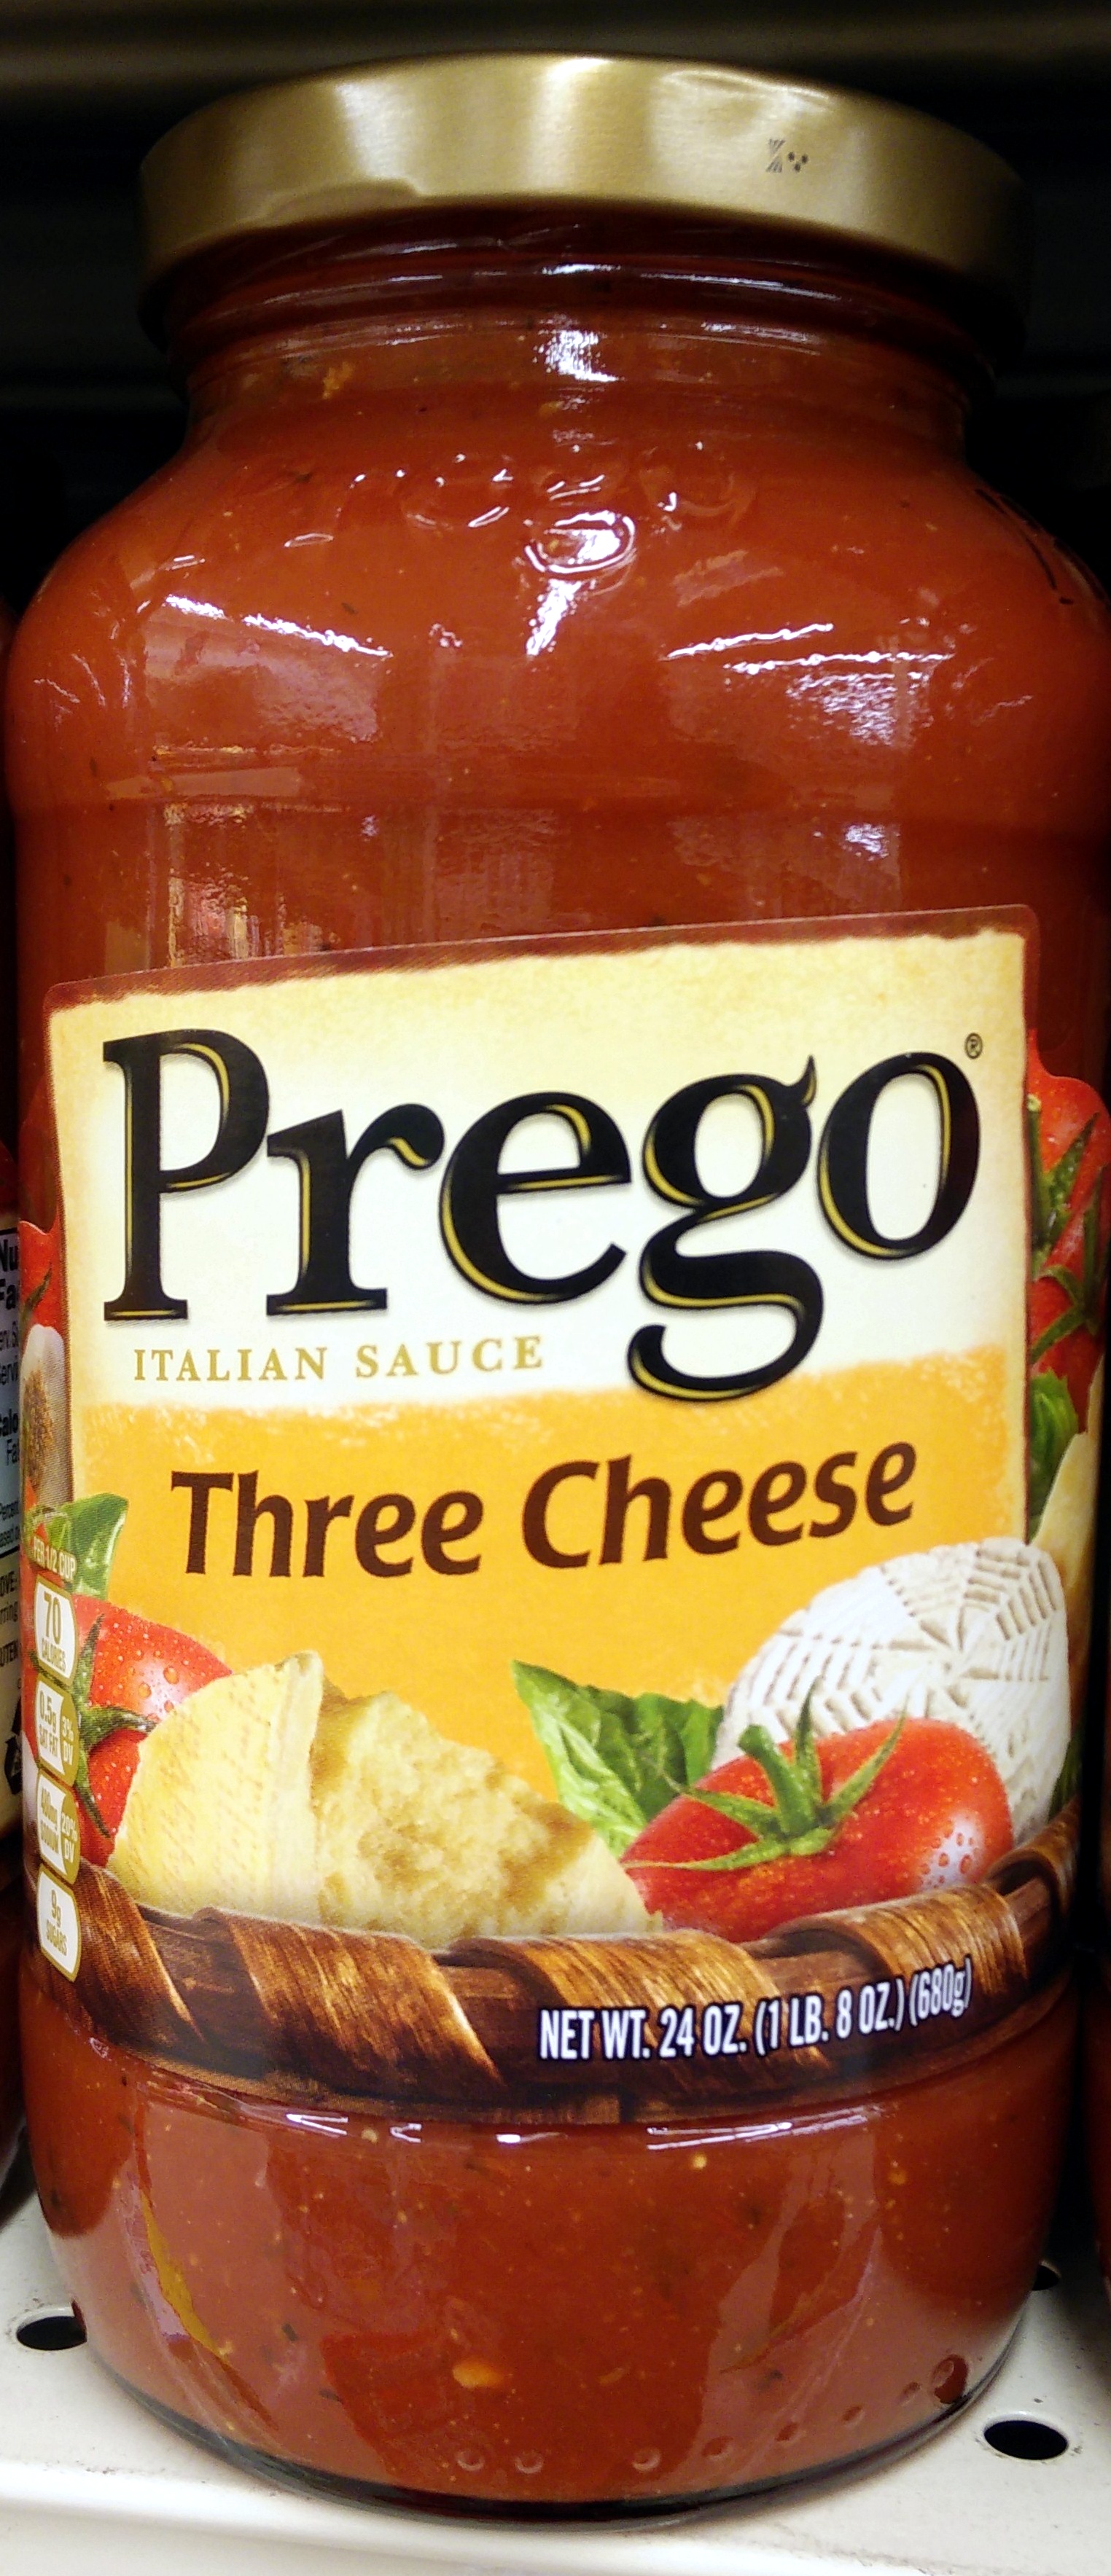 Prego sauces tomato & cheese - Product